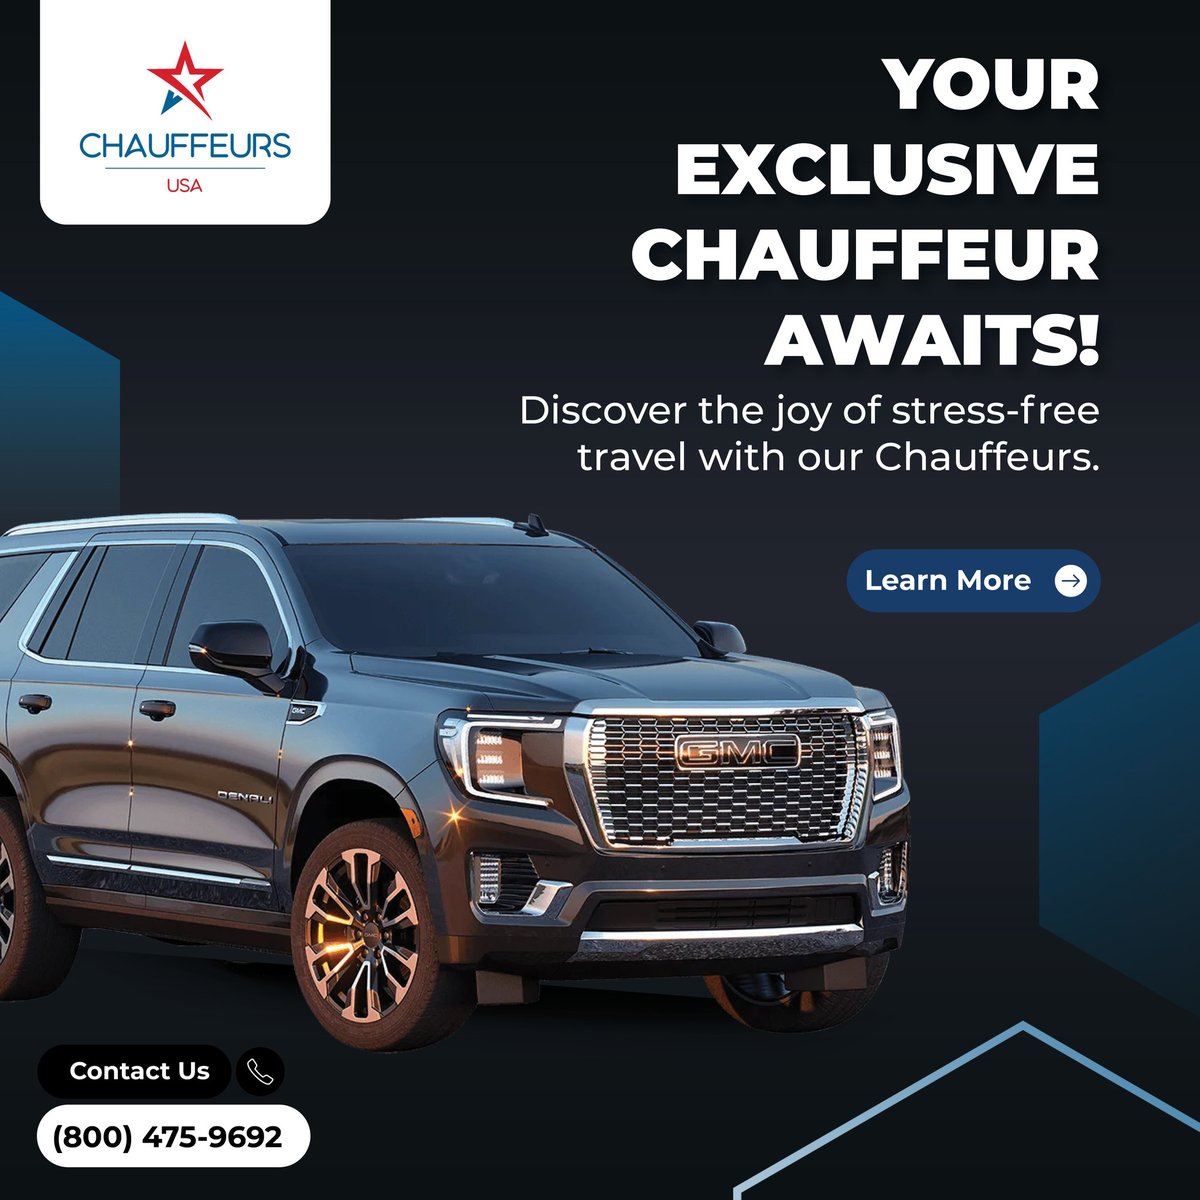 Experience the epitome of luxury travel with Chauffeurs USA. Our skilled drivers are not just experts on the road but also ambassadors of sophistication. 

#ExclusiveRides #ChauffeurDriven #ExecutiveTravel #ArriveInElegance #PremiumService